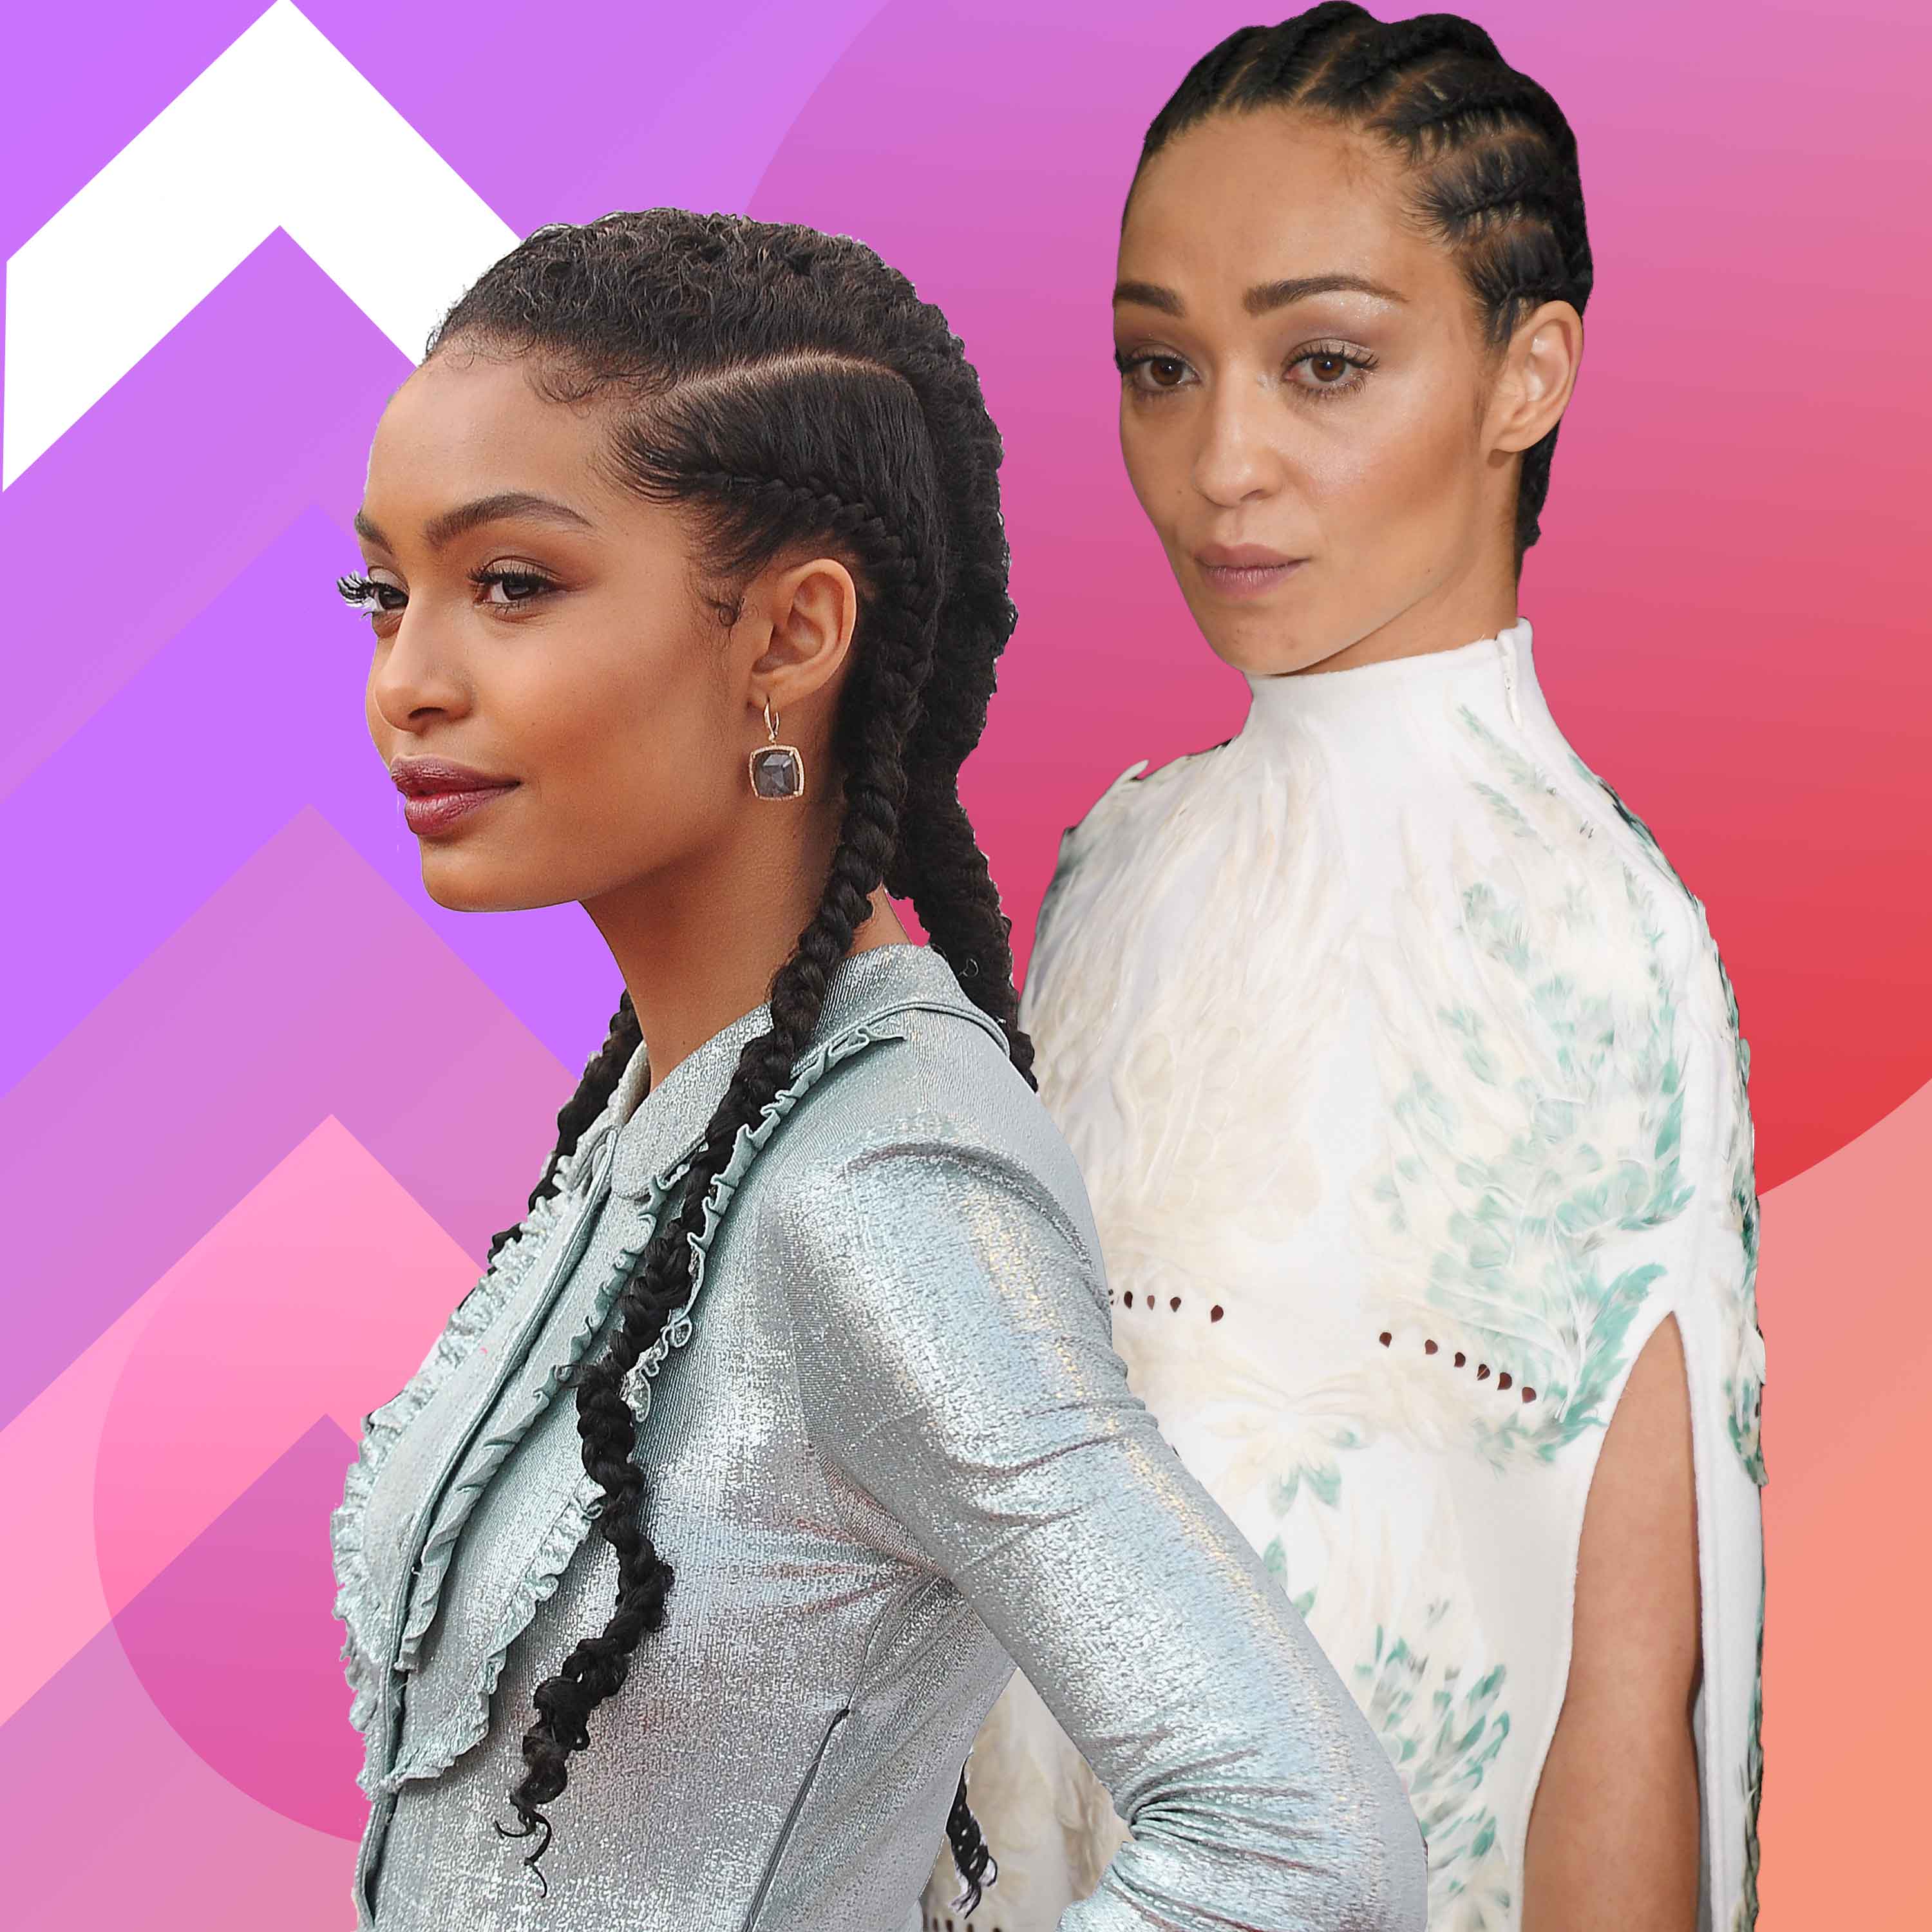 For The Culture: 29 Celebs Slaying In Straight Back Cornrows
